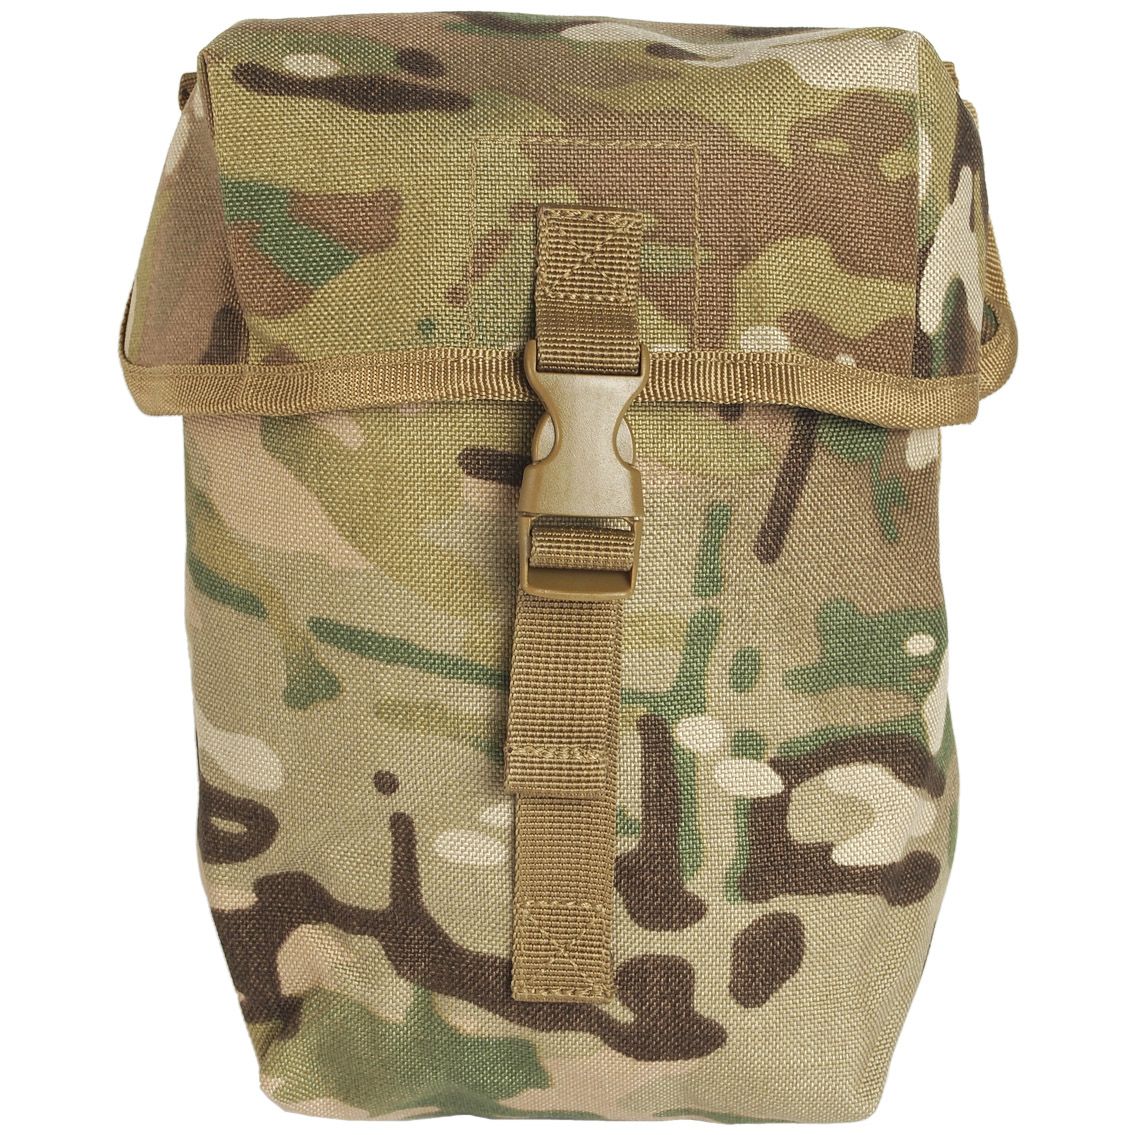 MIL-TEC UTILITY POUCH LARGE MOLLE MULTITARN